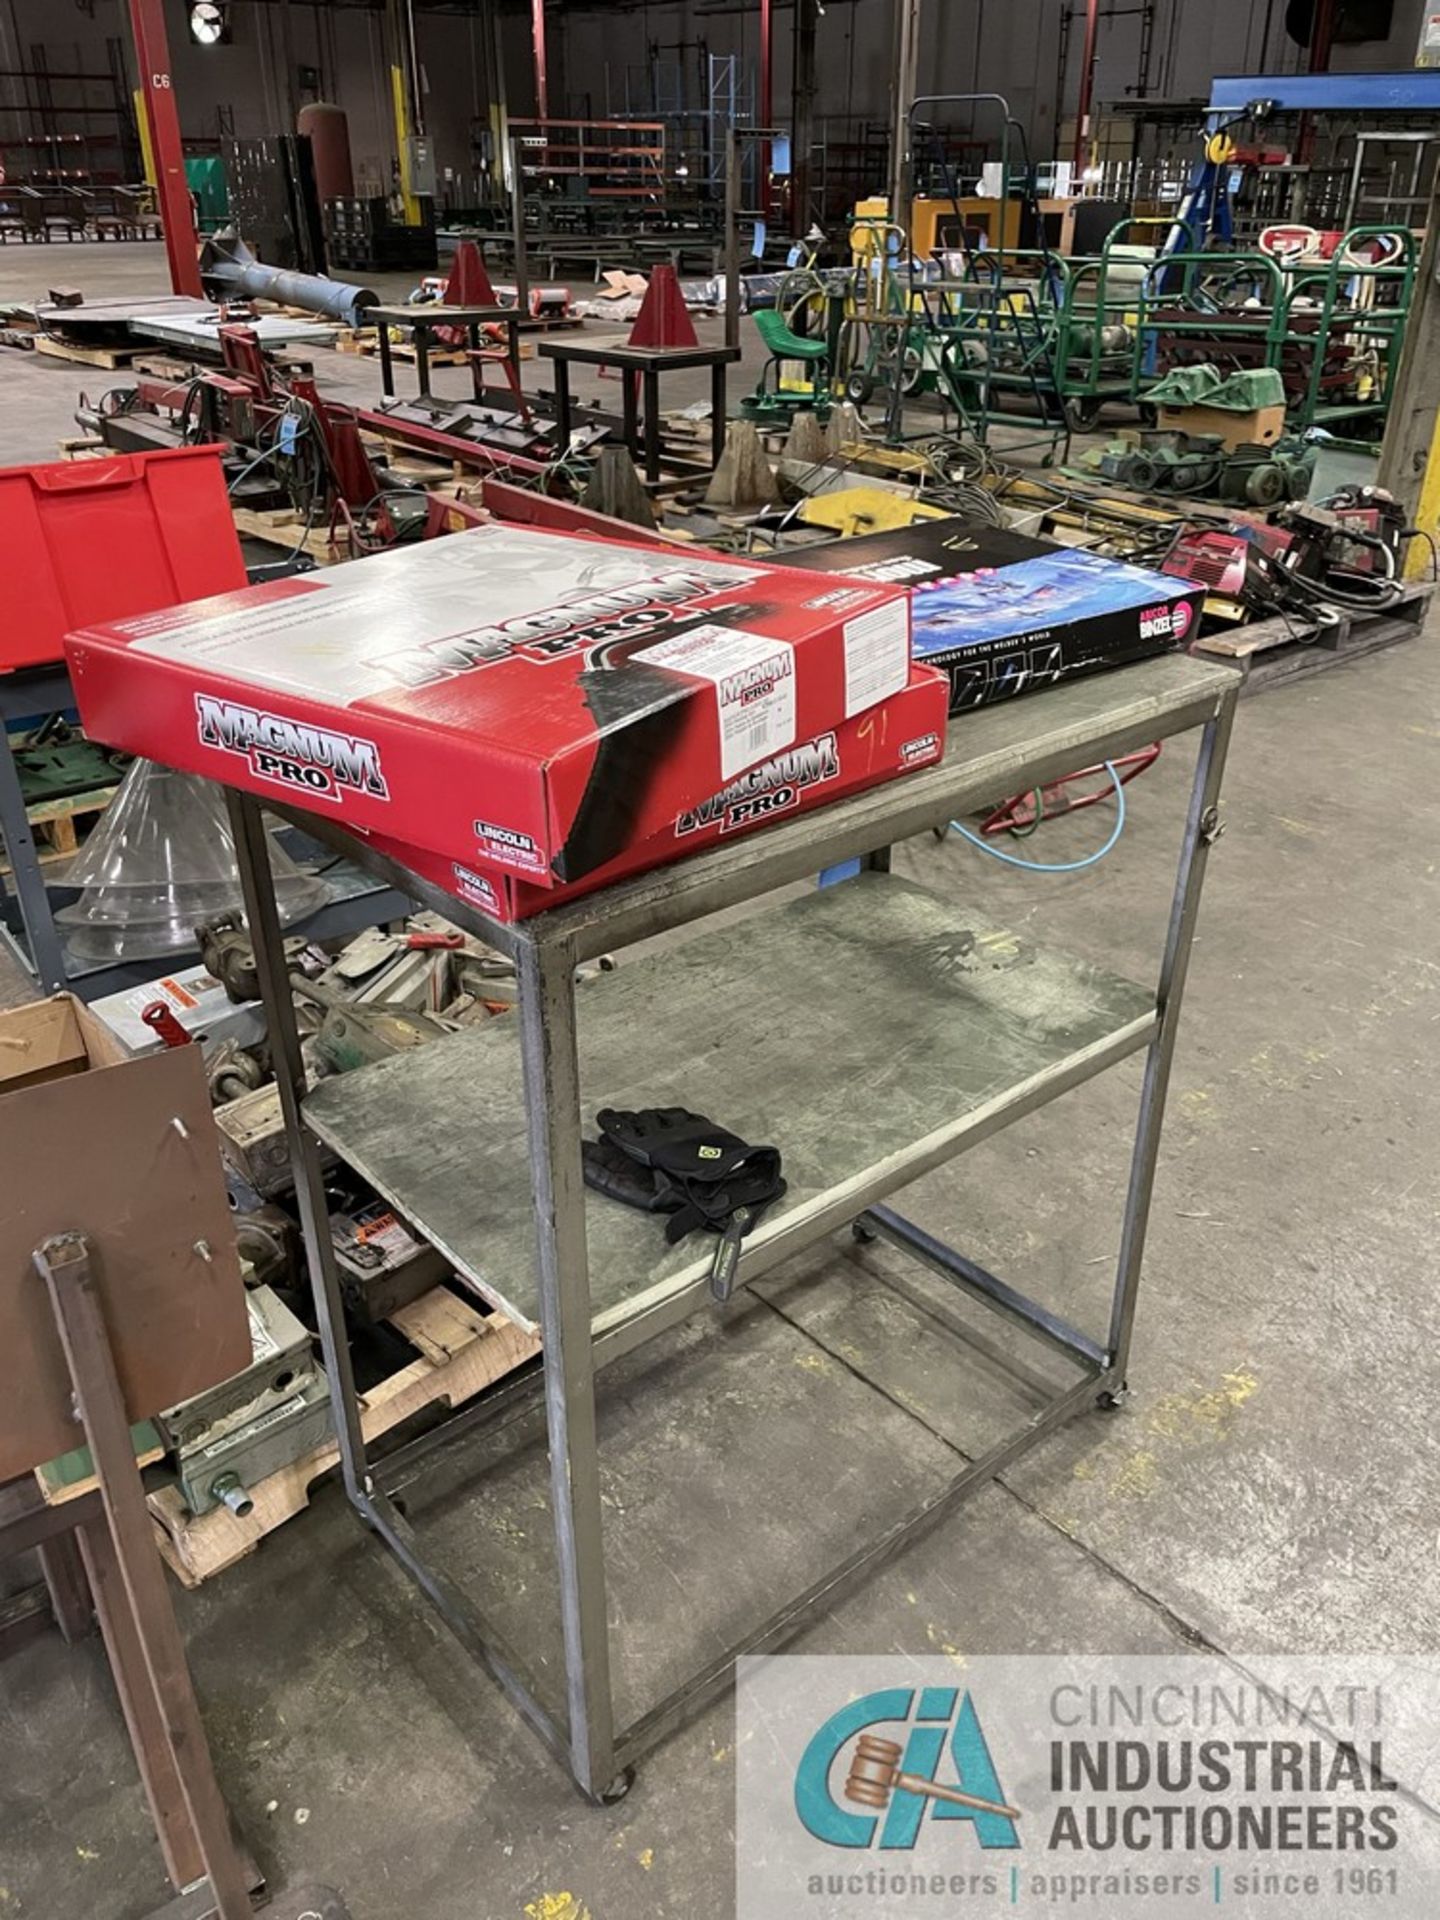 CART WITH (2) MAGNEPRO 700A WELDING GUNS AND (1) ABICOR BINZEL OMEGA 3T 10' WELDING GUN - Image 3 of 8